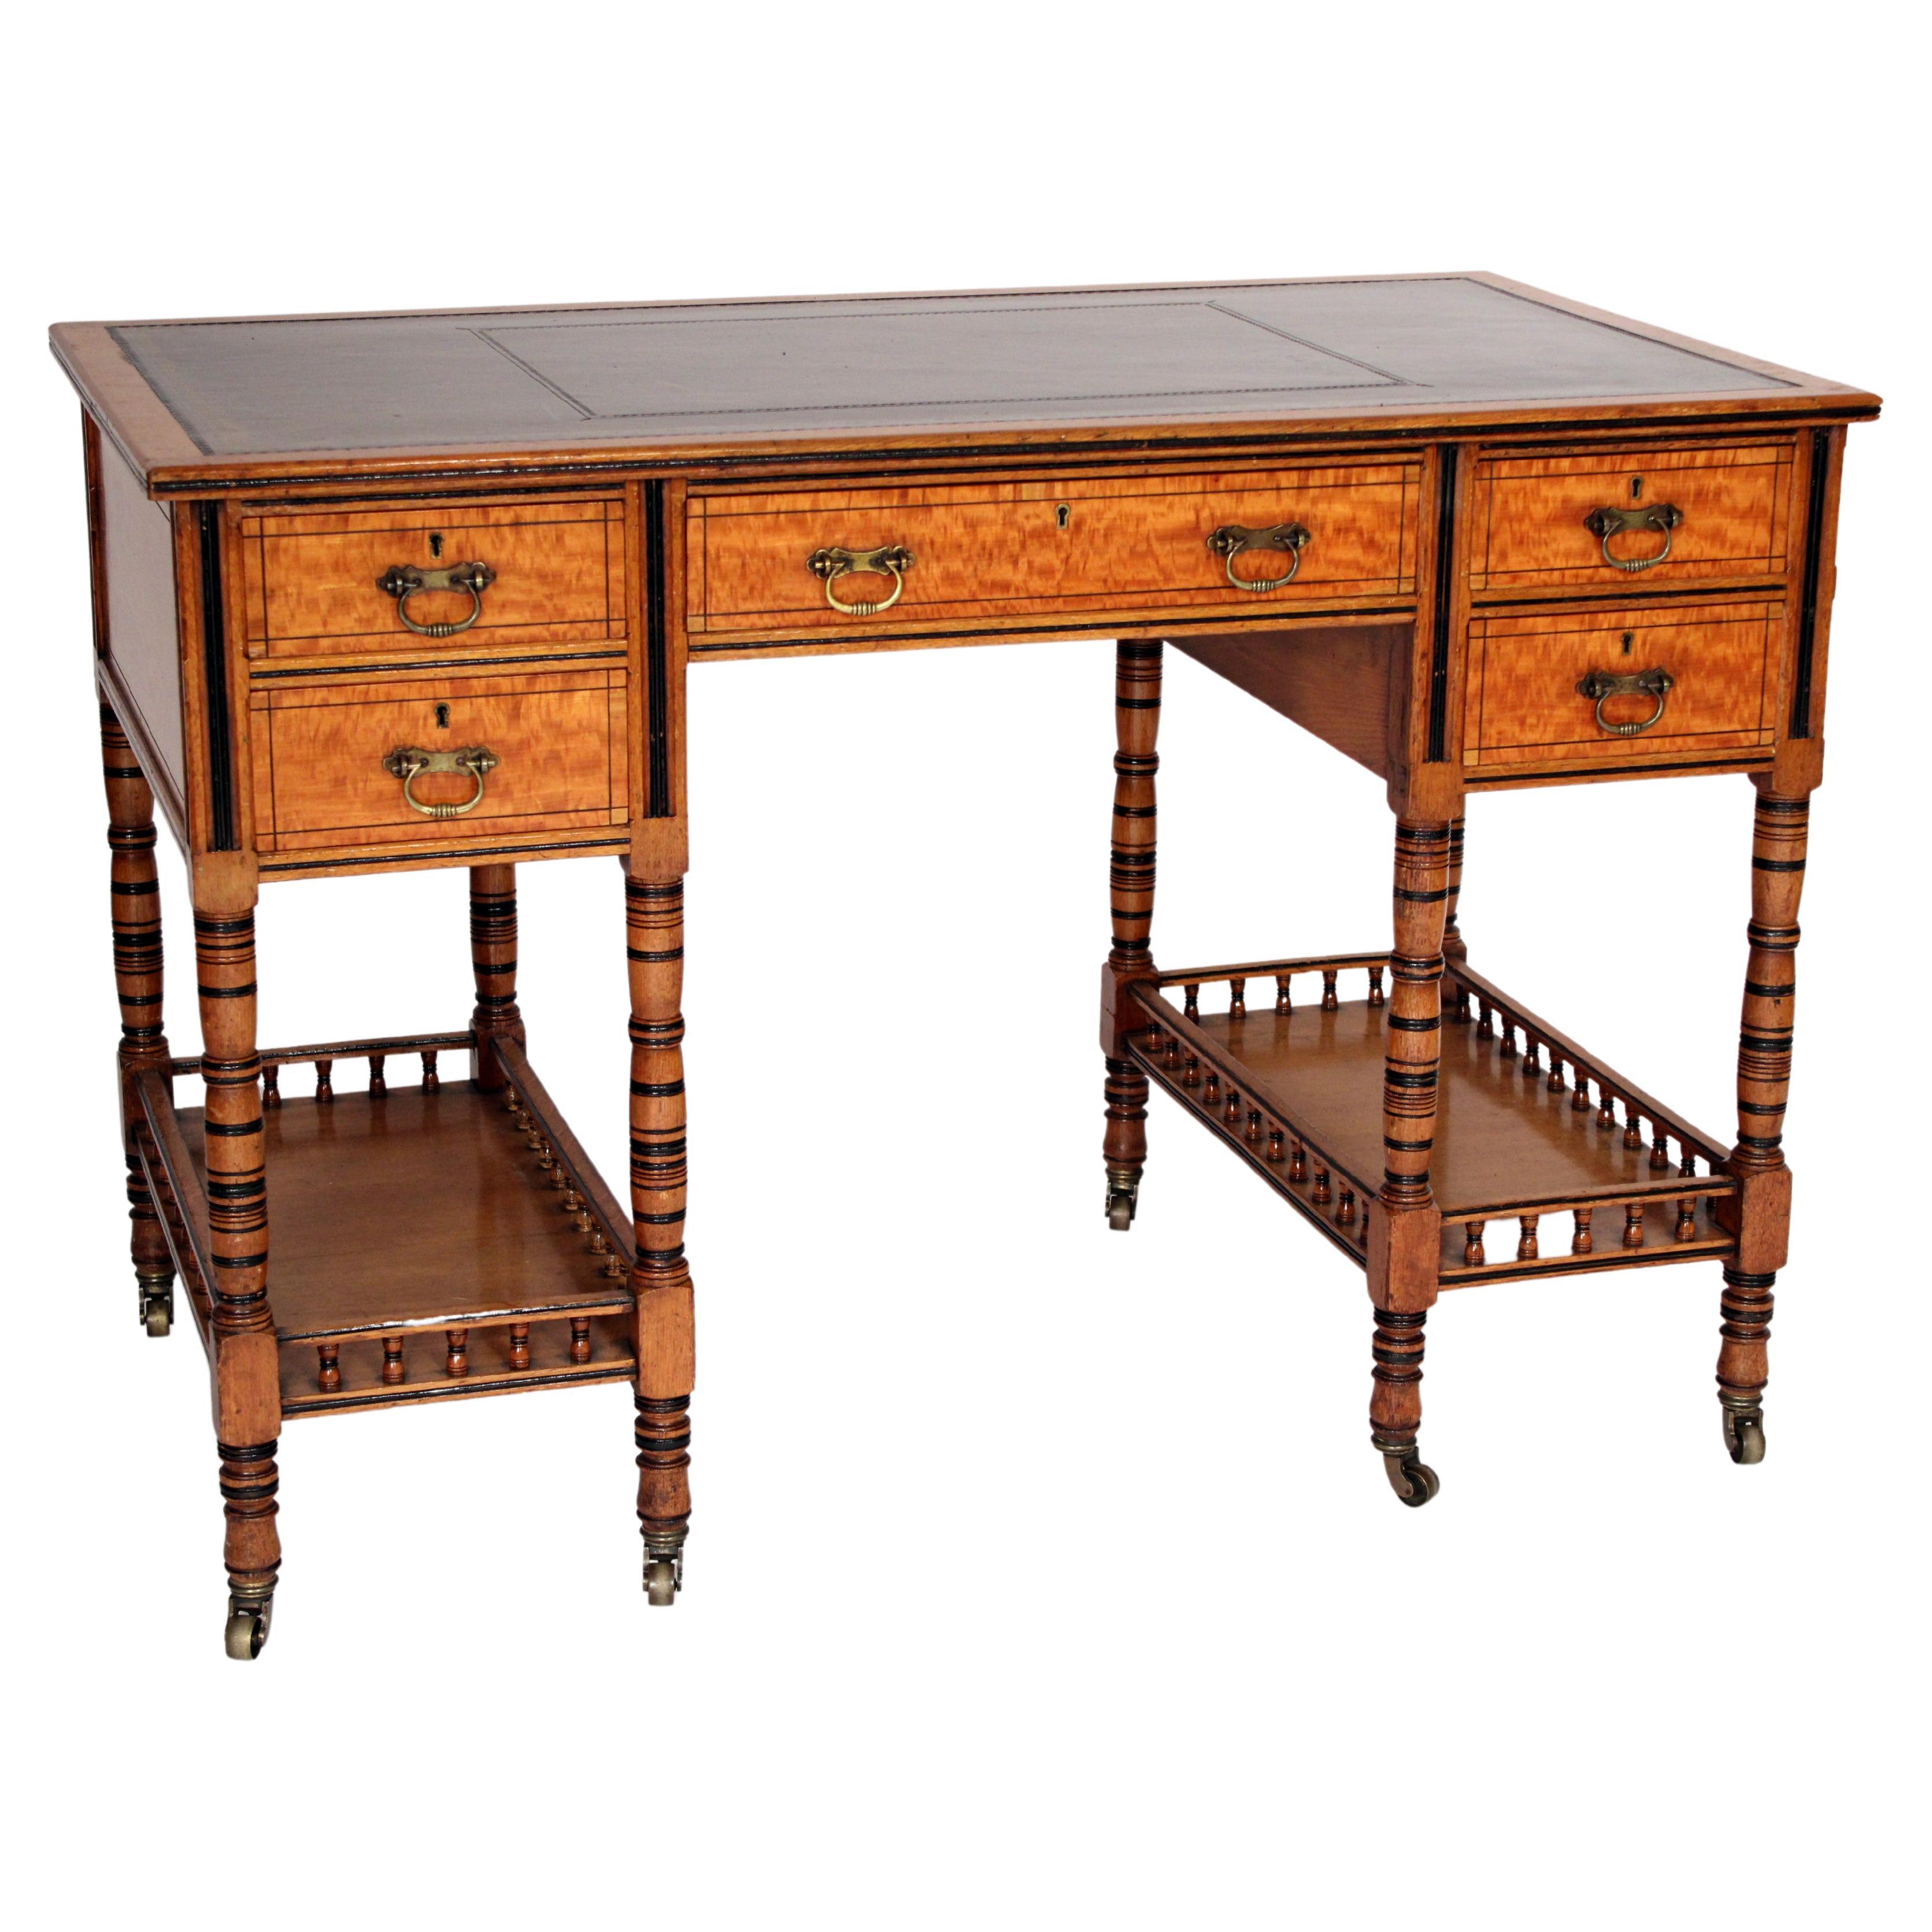 Aesthetic Movement Satin wood and Oak Leather Top Desk